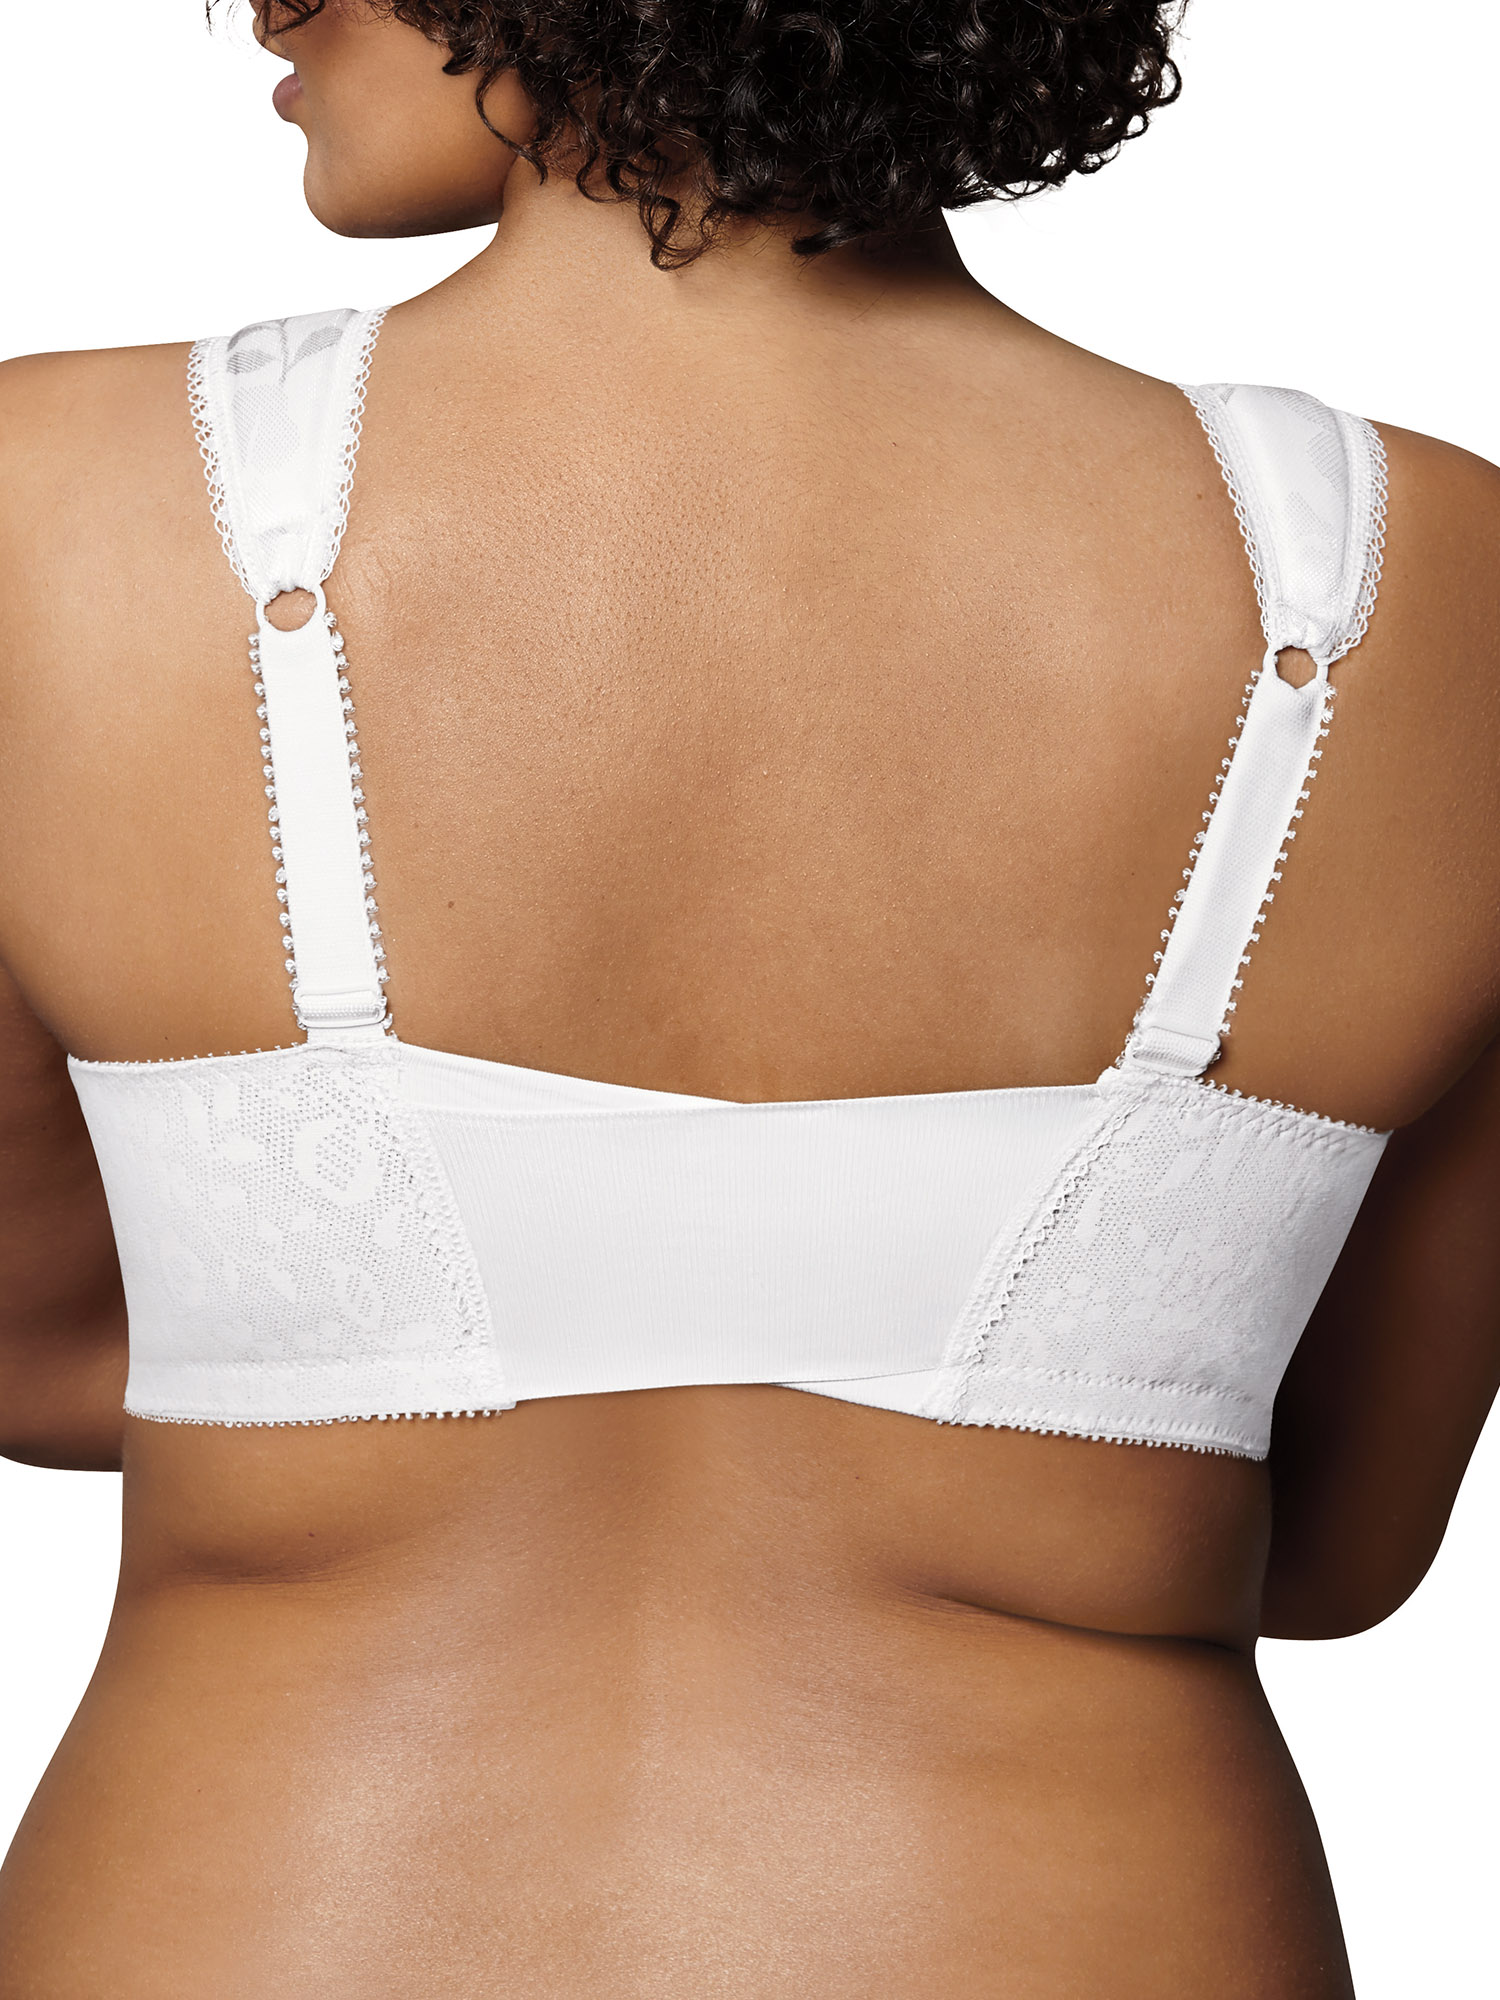 Playtex 18 Hour Supportive Flexible Back Front-Close Wireless Bra White 36D Women's - image 3 of 8